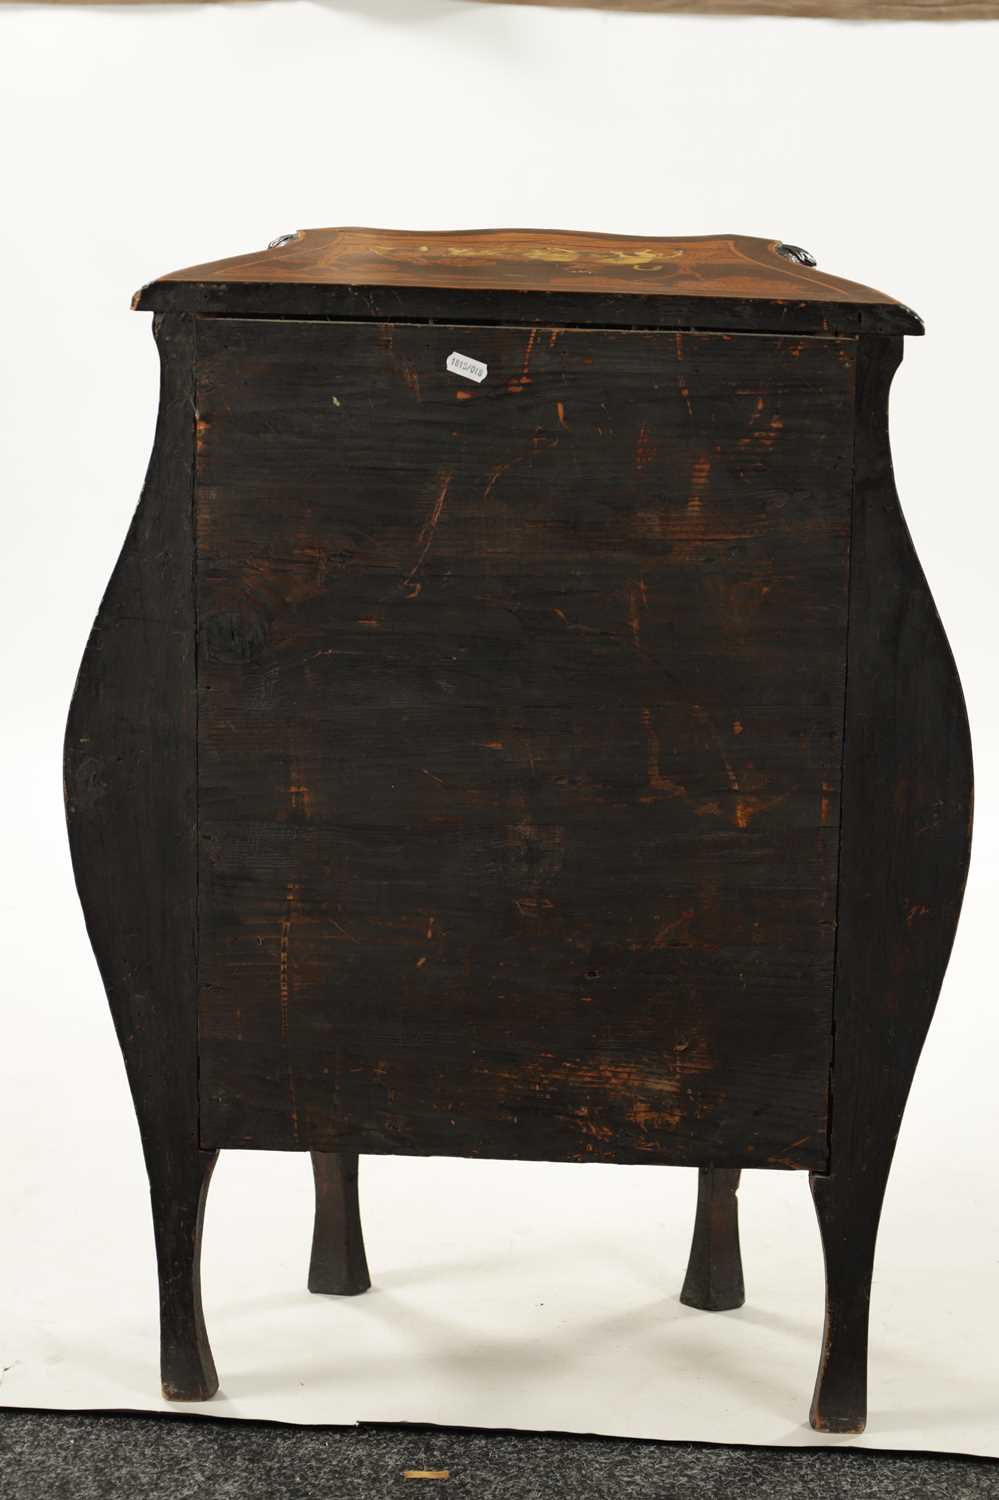 AN EARLY 18TH CENTURY ITALIAN MARQUETRY AND BONE INLAID COMMODE OF SMALL SIZE - Image 9 of 9